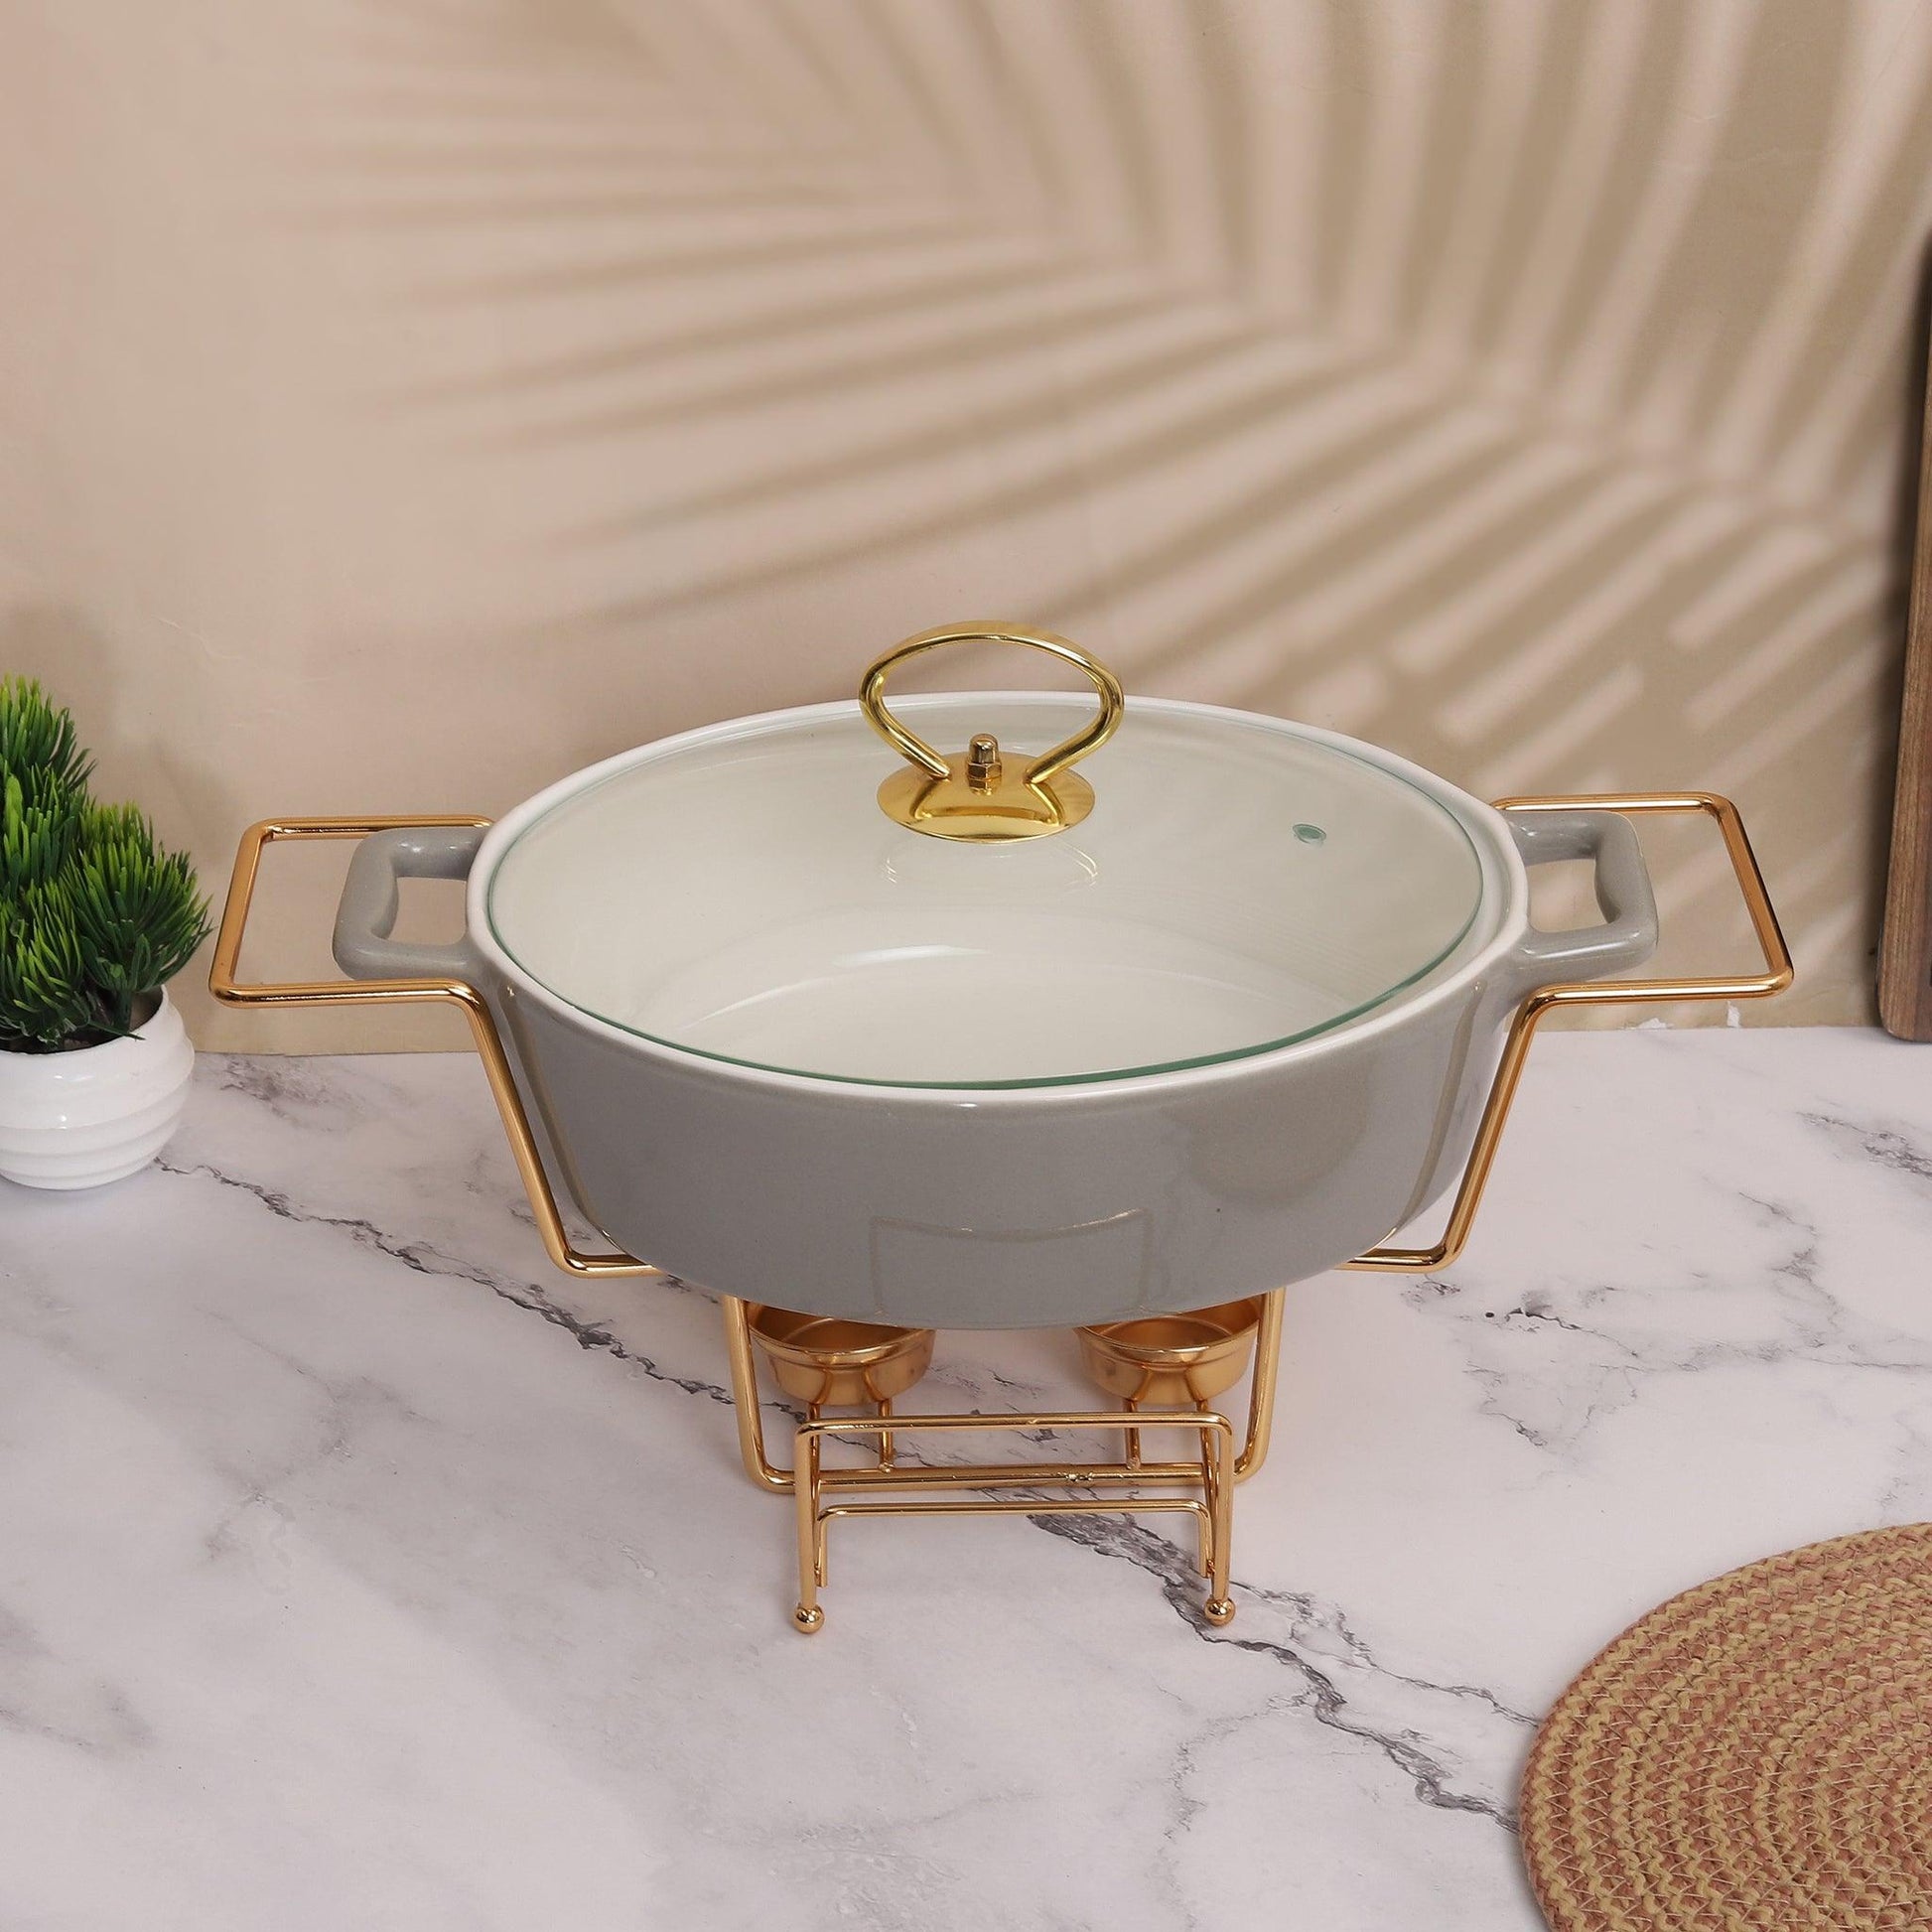 Oval Grey Chafing Dish Casserole with Candle Warmer Stand 29.5 cm 1.5 litre - Amora Crockery